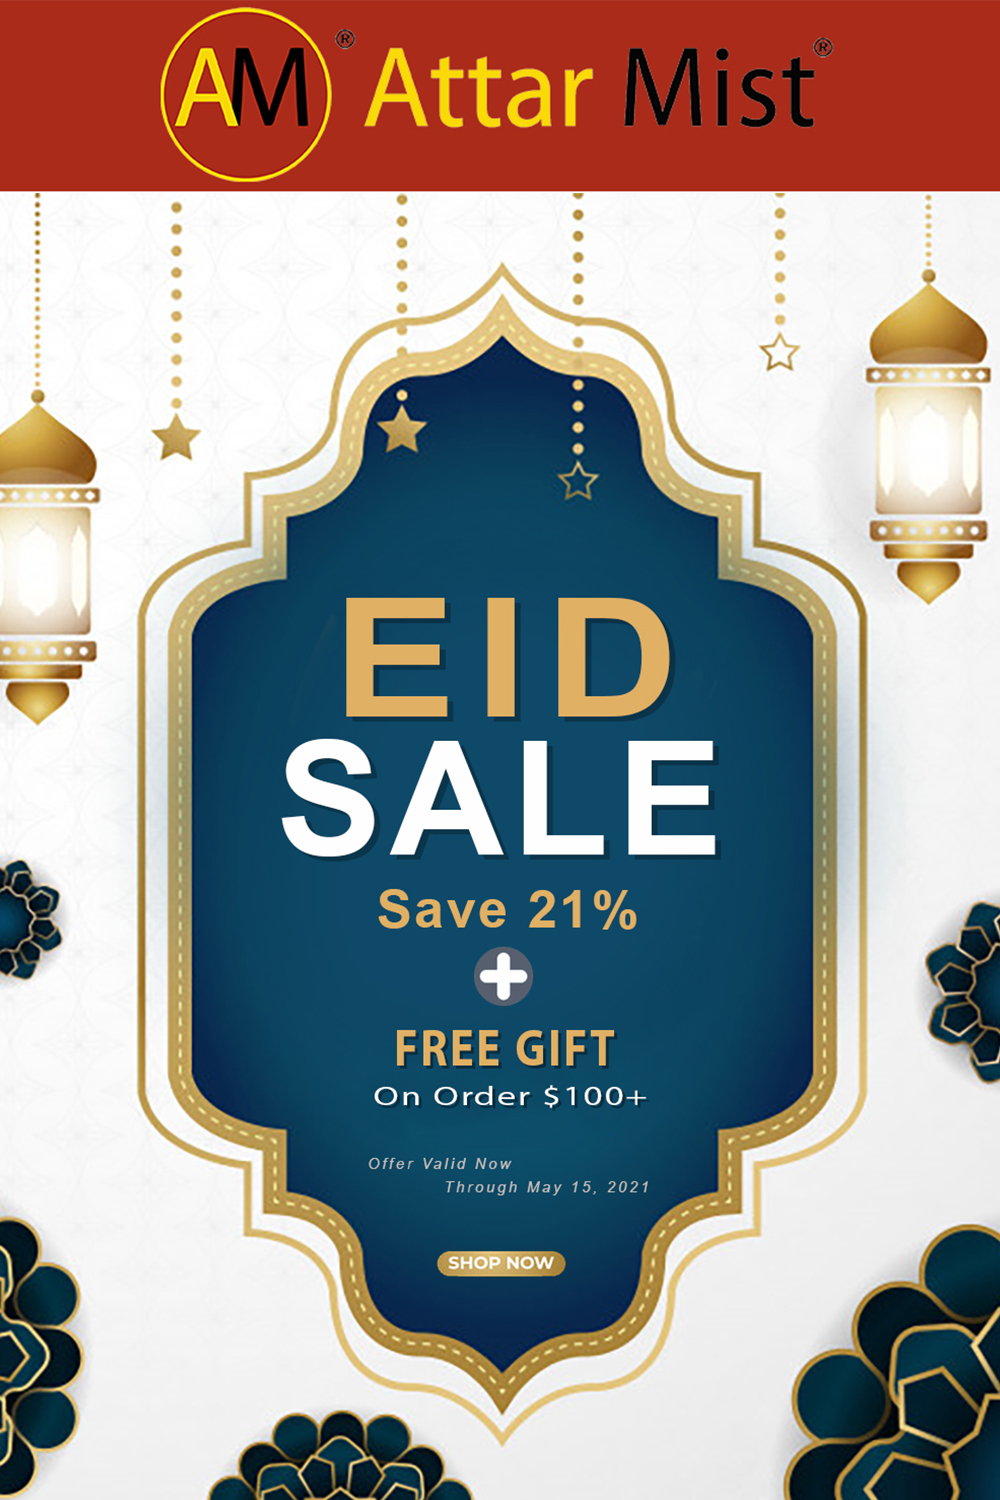 Eid Sale 21% Off - Only until May 15, 2021